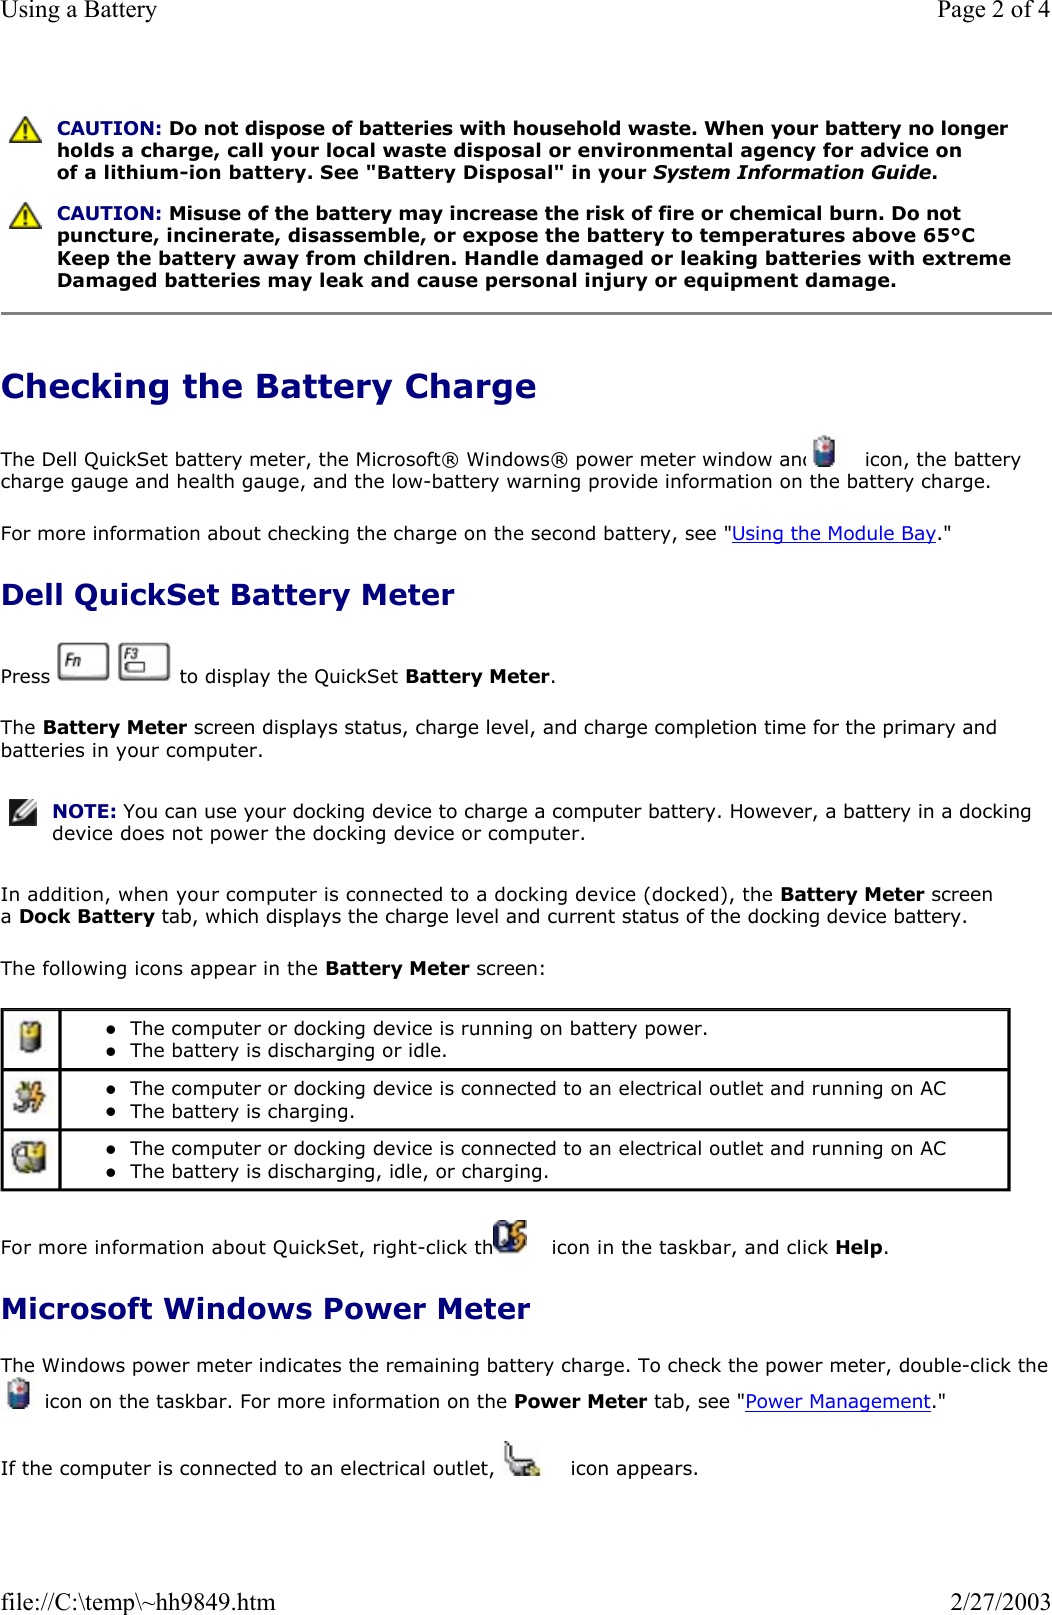 Checking the Battery Charge The Dell QuickSet battery meter, the Microsoft® Windows® power meter window and   icon, the battery charge gauge and health gauge, and the low-battery warning provide information on the battery charge.  For more information about checking the charge on the second battery, see &quot;Using the Module Bay.&quot; Dell QuickSet Battery Meter Press     to display the QuickSet Battery Meter. The Battery Meter screen displays status, charge level, and charge completion time for the primary and batteries in your computer. In addition, when your computer is connected to a docking device (docked), the Battery Meter screen a Dock Battery tab, which displays the charge level and current status of the docking device battery. The following icons appear in the Battery Meter screen: For more information about QuickSet, right-click the   icon in the taskbar, and click Help. Microsoft Windows Power Meter The Windows power meter indicates the remaining battery charge. To check the power meter, double-click the icon on the taskbar. For more information on the Power Meter tab, see &quot;Power Management.&quot; If the computer is connected to an electrical outlet, a   icon appears.  CAUTION: Do not dispose of batteries with household waste. When your battery no longer holds a charge, call your local waste disposal or environmental agency for advice on of a lithium-ion battery. See &quot;Battery Disposal&quot; in your System Information Guide. CAUTION: Misuse of the battery may increase the risk of fire or chemical burn. Do not puncture, incinerate, disassemble, or expose the battery to temperatures above 65°C Keep the battery away from children. Handle damaged or leaking batteries with extreme Damaged batteries may leak and cause personal injury or equipment damage. NOTE: You can use your docking device to charge a computer battery. However, a battery in a docking device does not power the docking device or computer. zThe computer or docking device is running on battery power.  zThe battery is discharging or idle.   zThe computer or docking device is connected to an electrical outlet and running on AC zThe battery is charging.   zThe computer or docking device is connected to an electrical outlet and running on AC zThe battery is discharging, idle, or charging.  Page 2 of 4Using a Battery2/27/2003file://C:\temp\~hh9849.htm